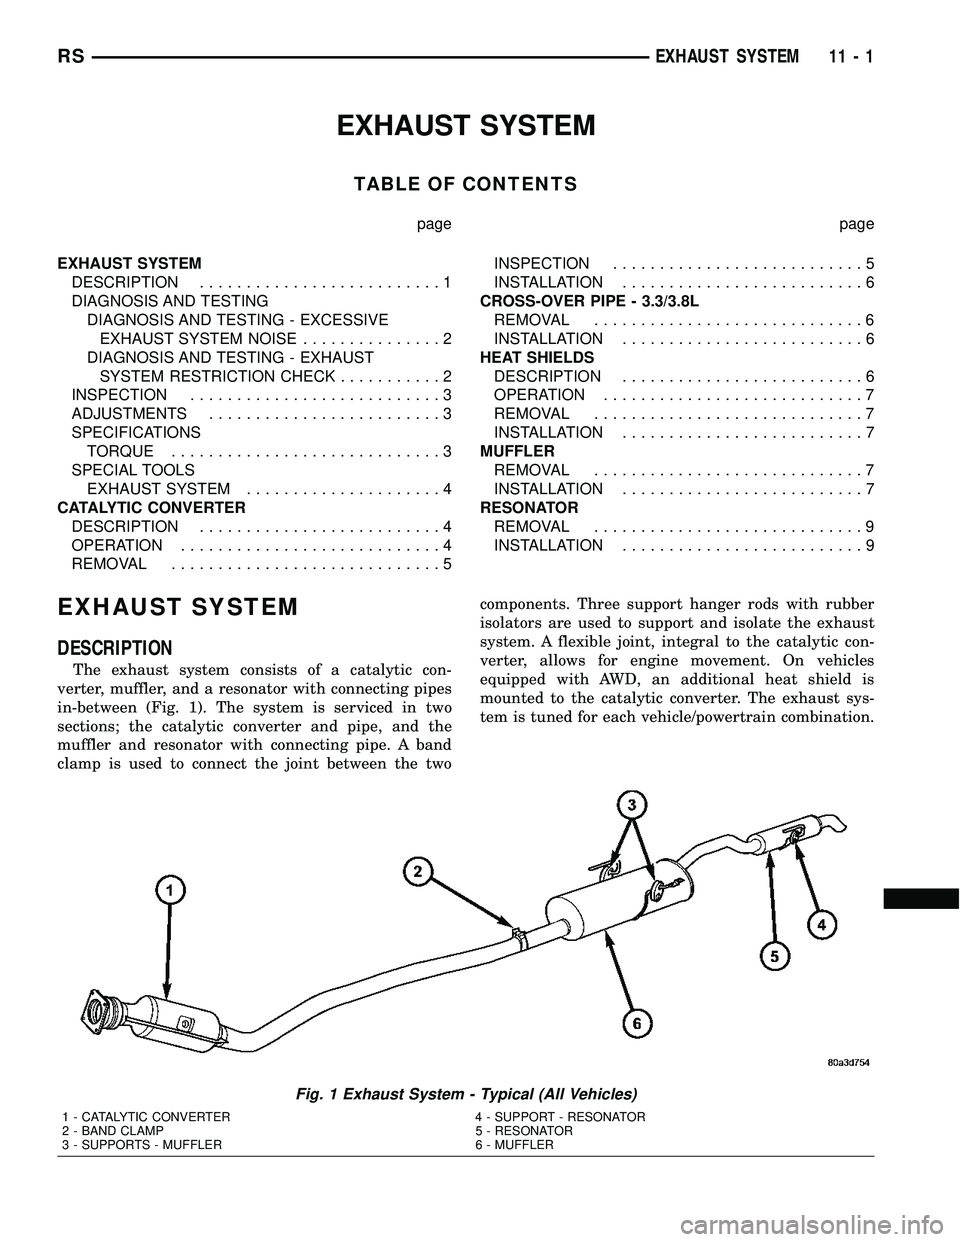 CHRYSLER VOYAGER 2004  Service Manual EXHAUST SYSTEM
TABLE OF CONTENTS
page page
EXHAUST SYSTEM
DESCRIPTION..........................1
DIAGNOSIS AND TESTING
DIAGNOSIS AND TESTING - EXCESSIVE
EXHAUST SYSTEM NOISE...............2
DIAGNOSIS 